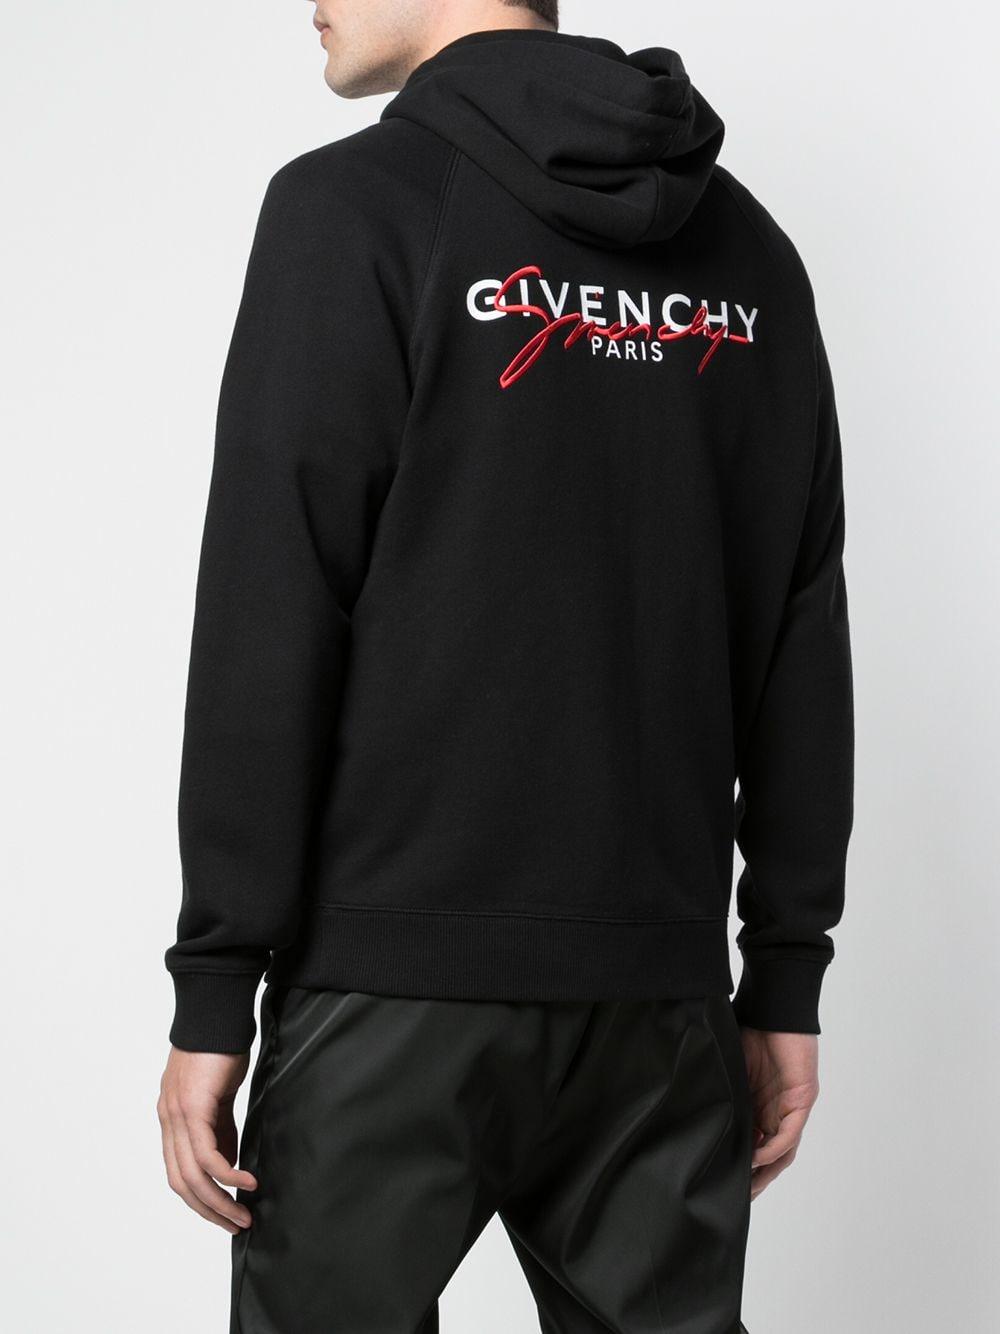 Total 56+ imagen givenchy zip up sweater